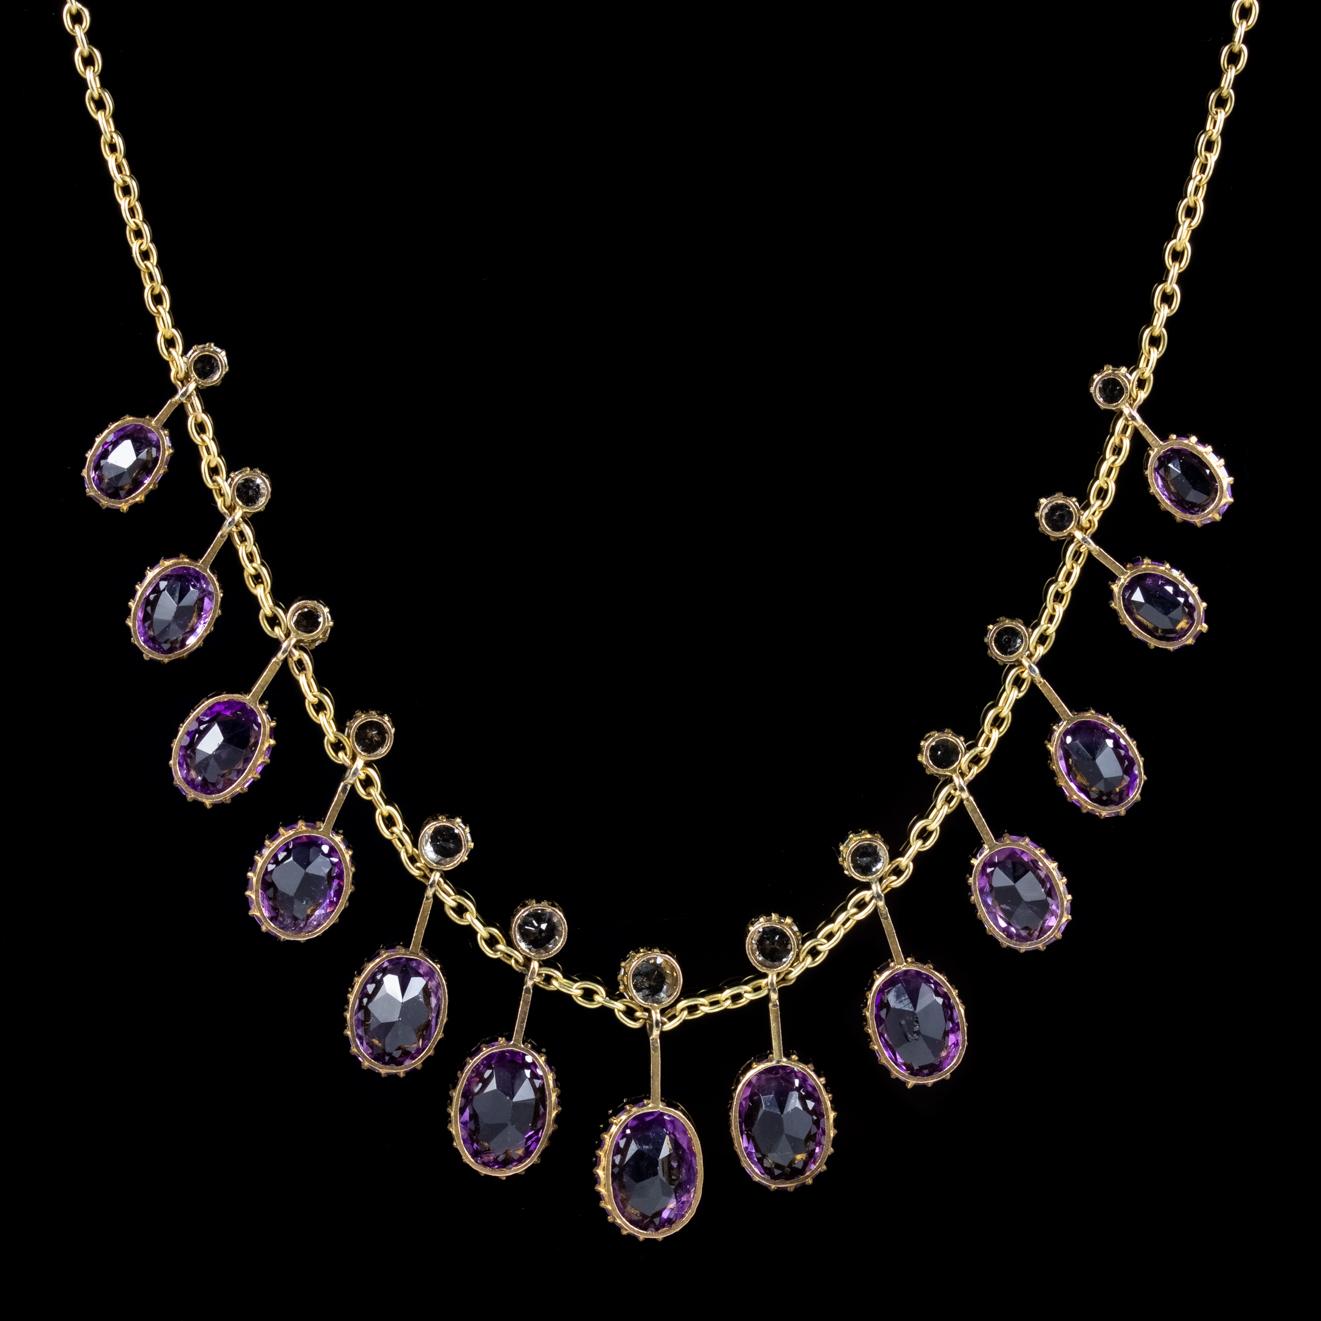 Antique Victorian Topaz Amethyst Necklace 9 Carat Gold, circa 1900 In Good Condition For Sale In Lancaster, Lancashire